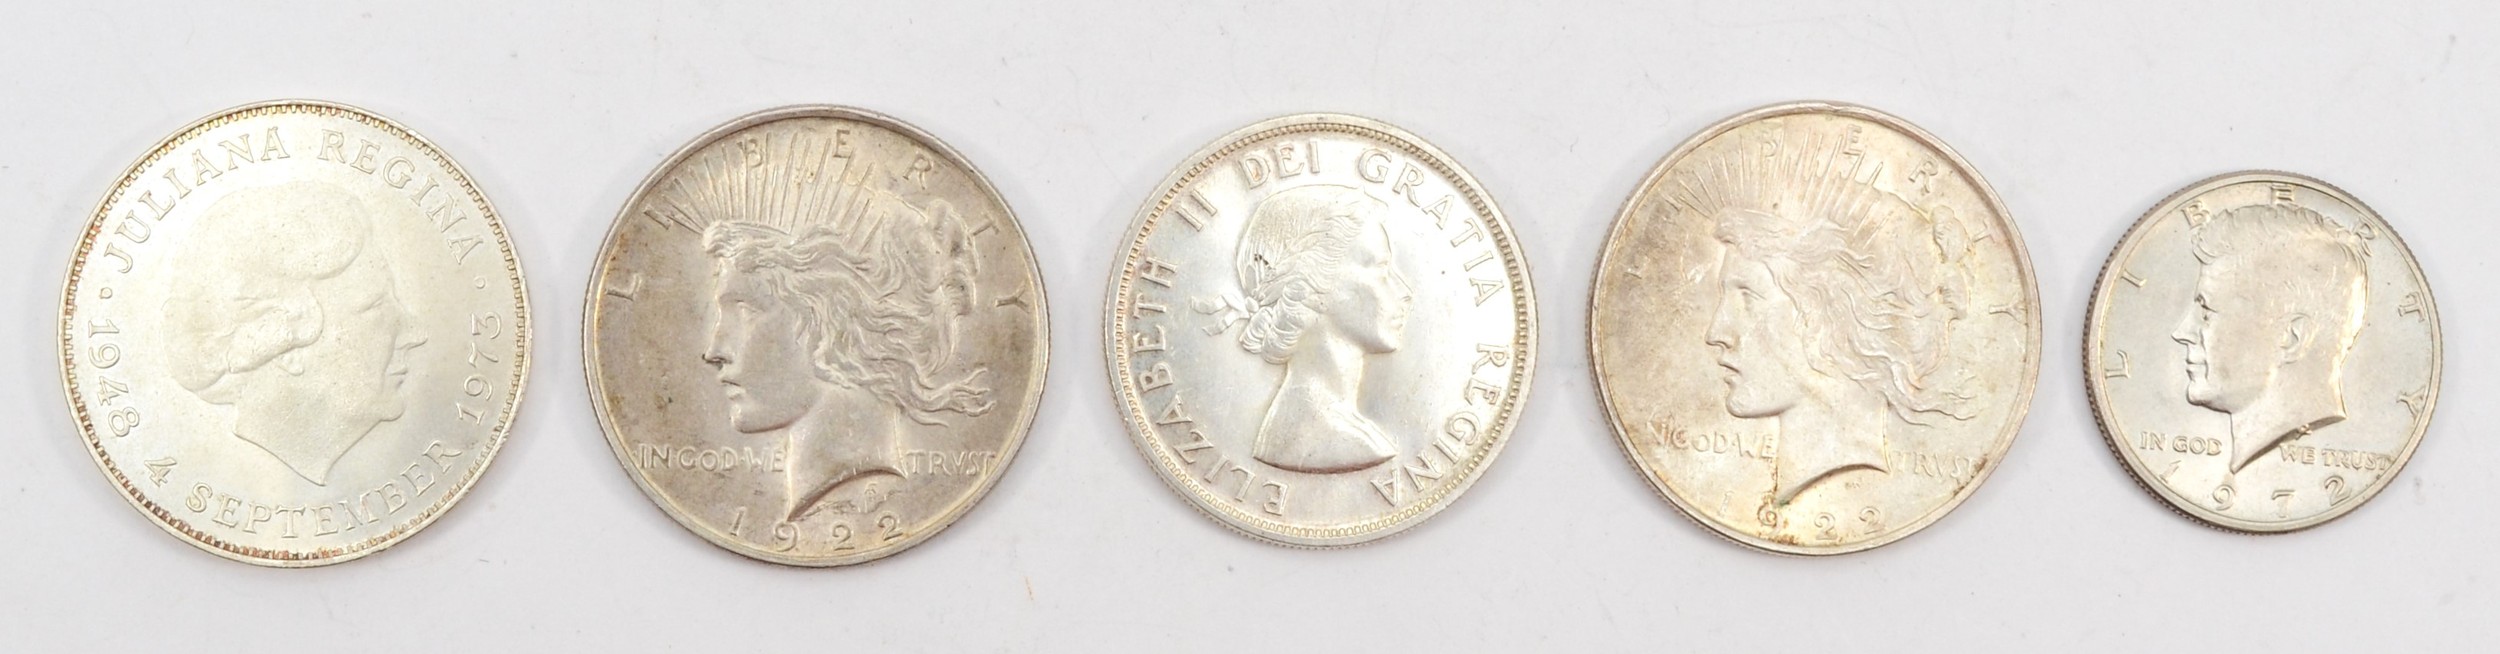 Two 1922 silver low relief peace dollars, a 1972 Kennedy half dollar, a silver Canadian totem pole